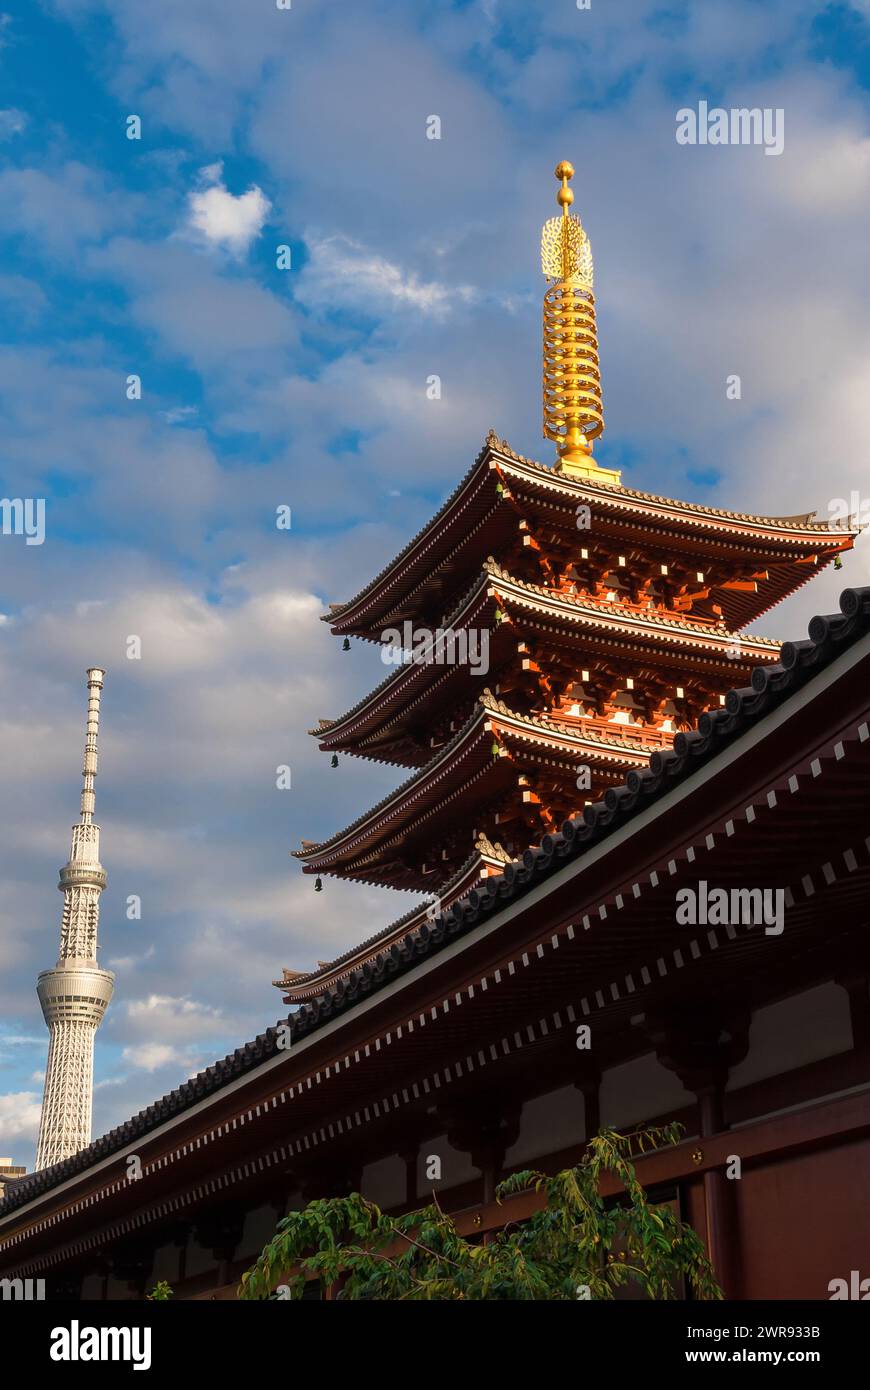 Japan between tradition and modernity. Ancient Senso-ji beautiful pagoda in Asakusa with the new Tokyo Skytree, the tallest tower in the world Stock Photo